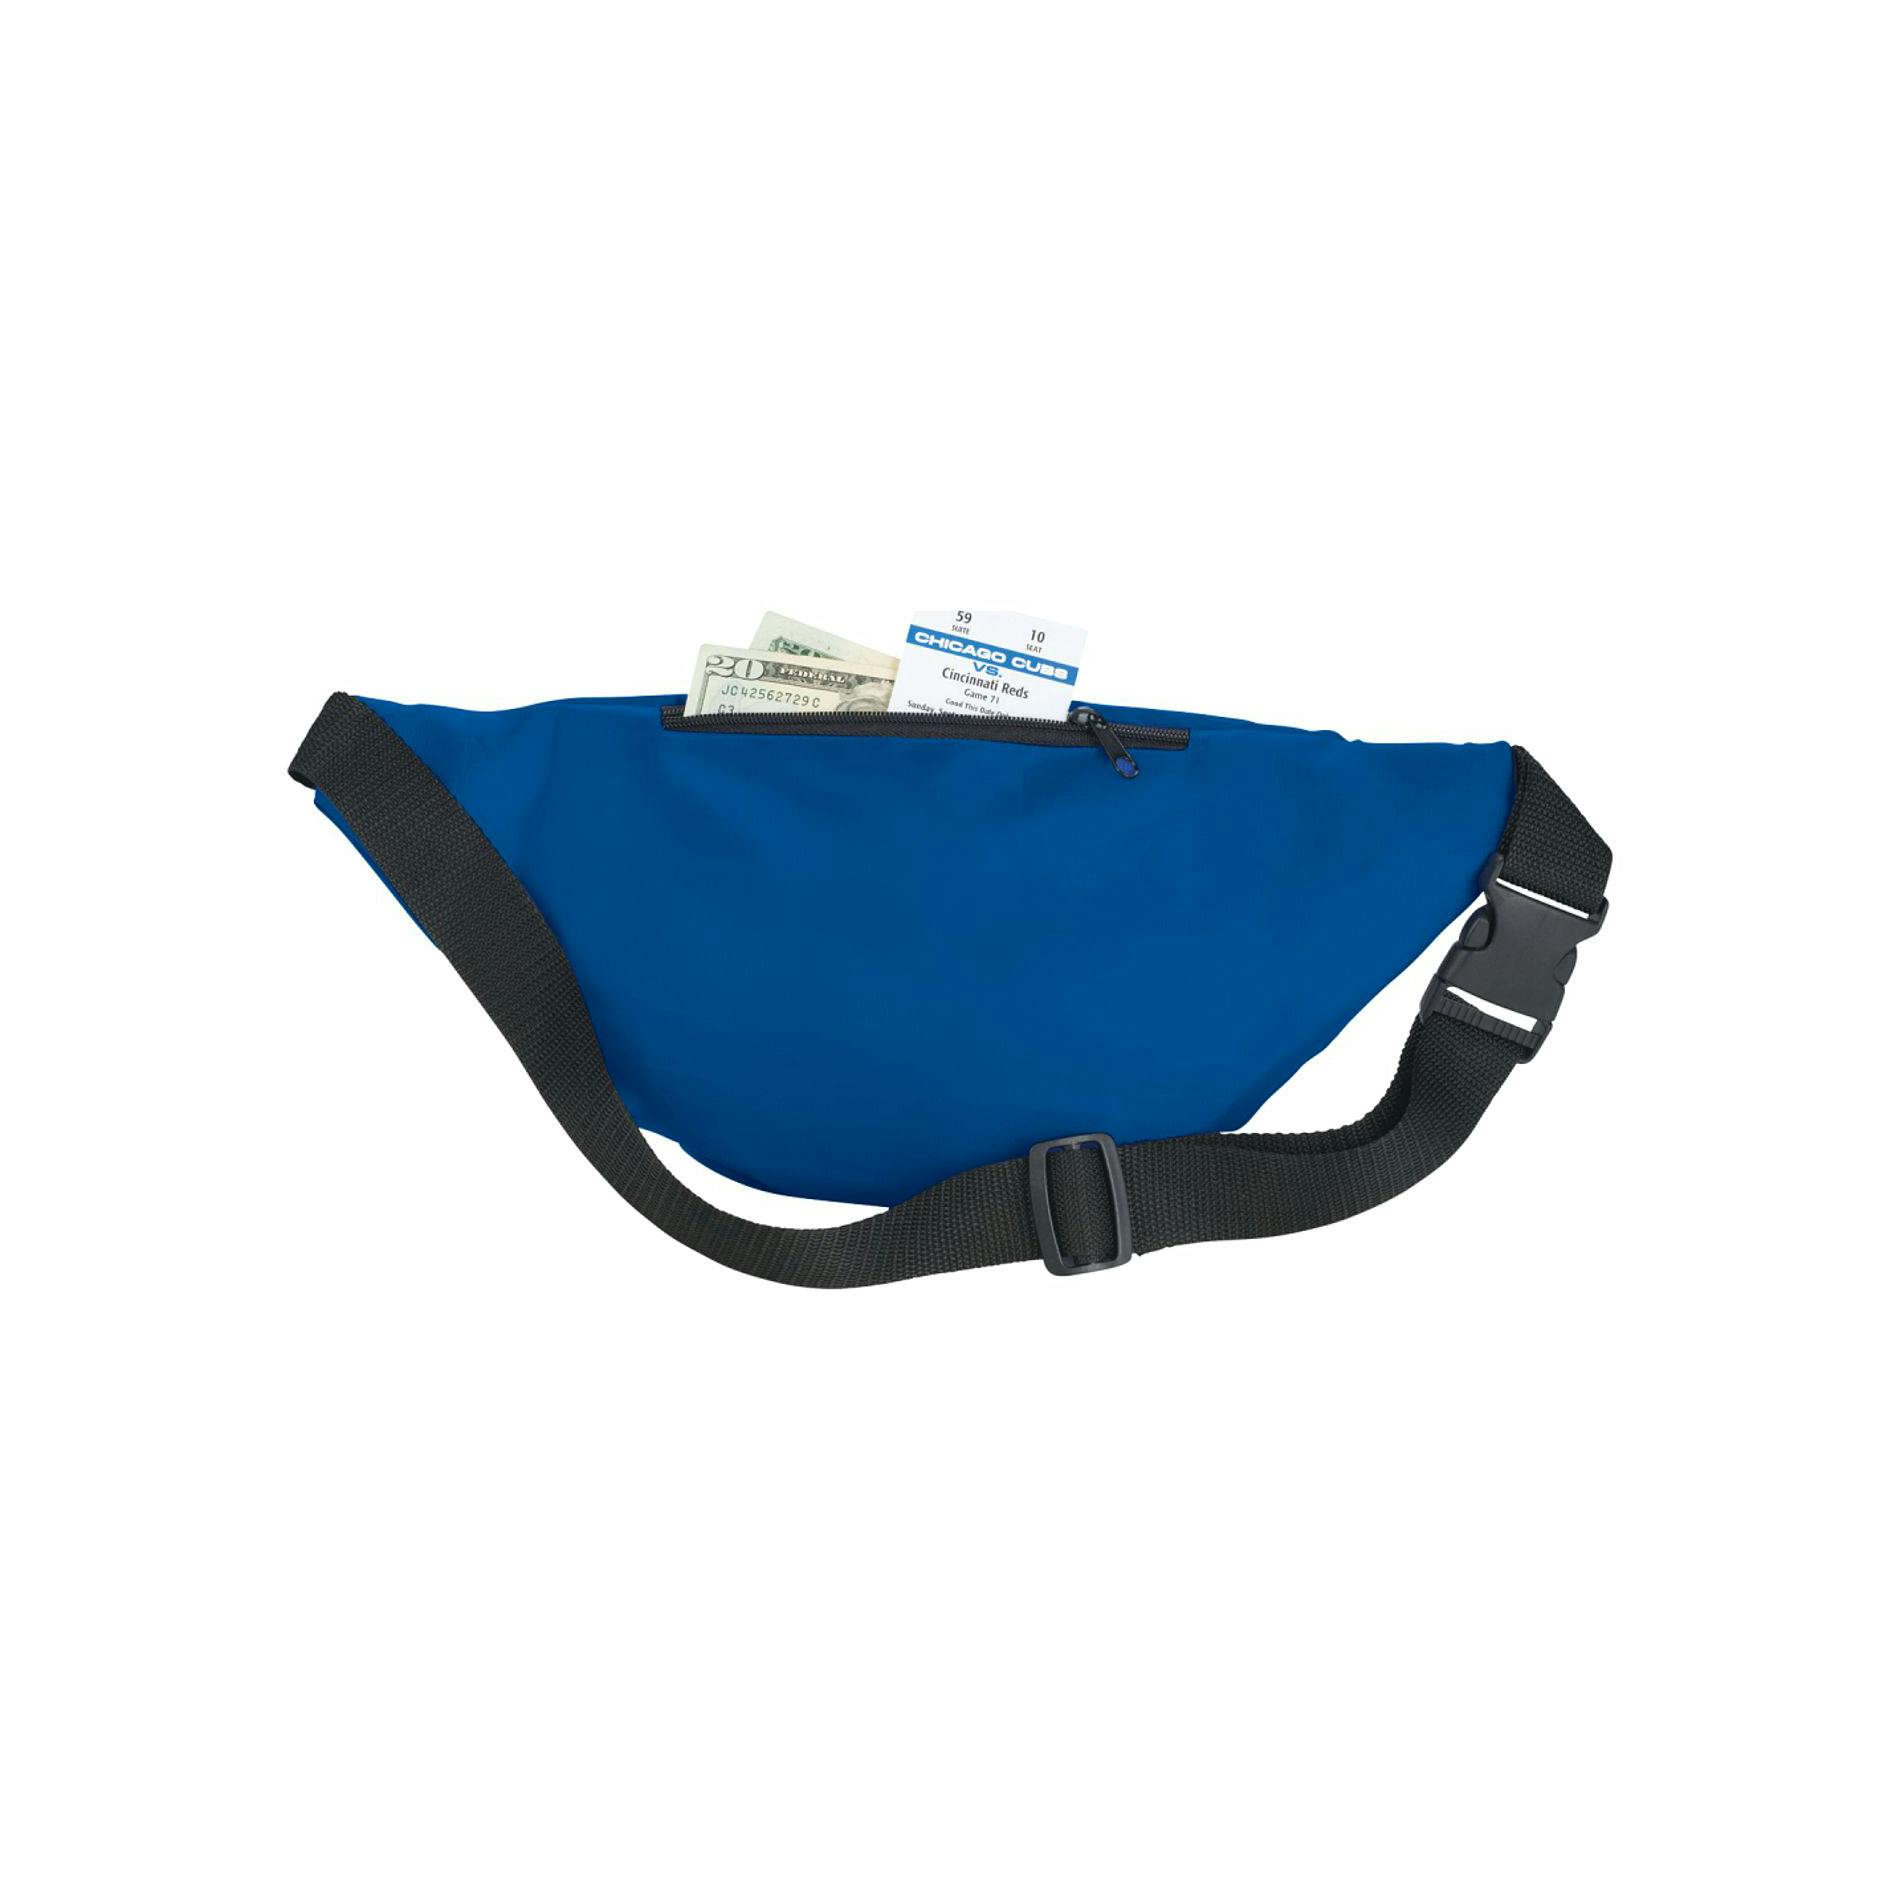 Hipster Deluxe Fanny Pack - additional Image 4